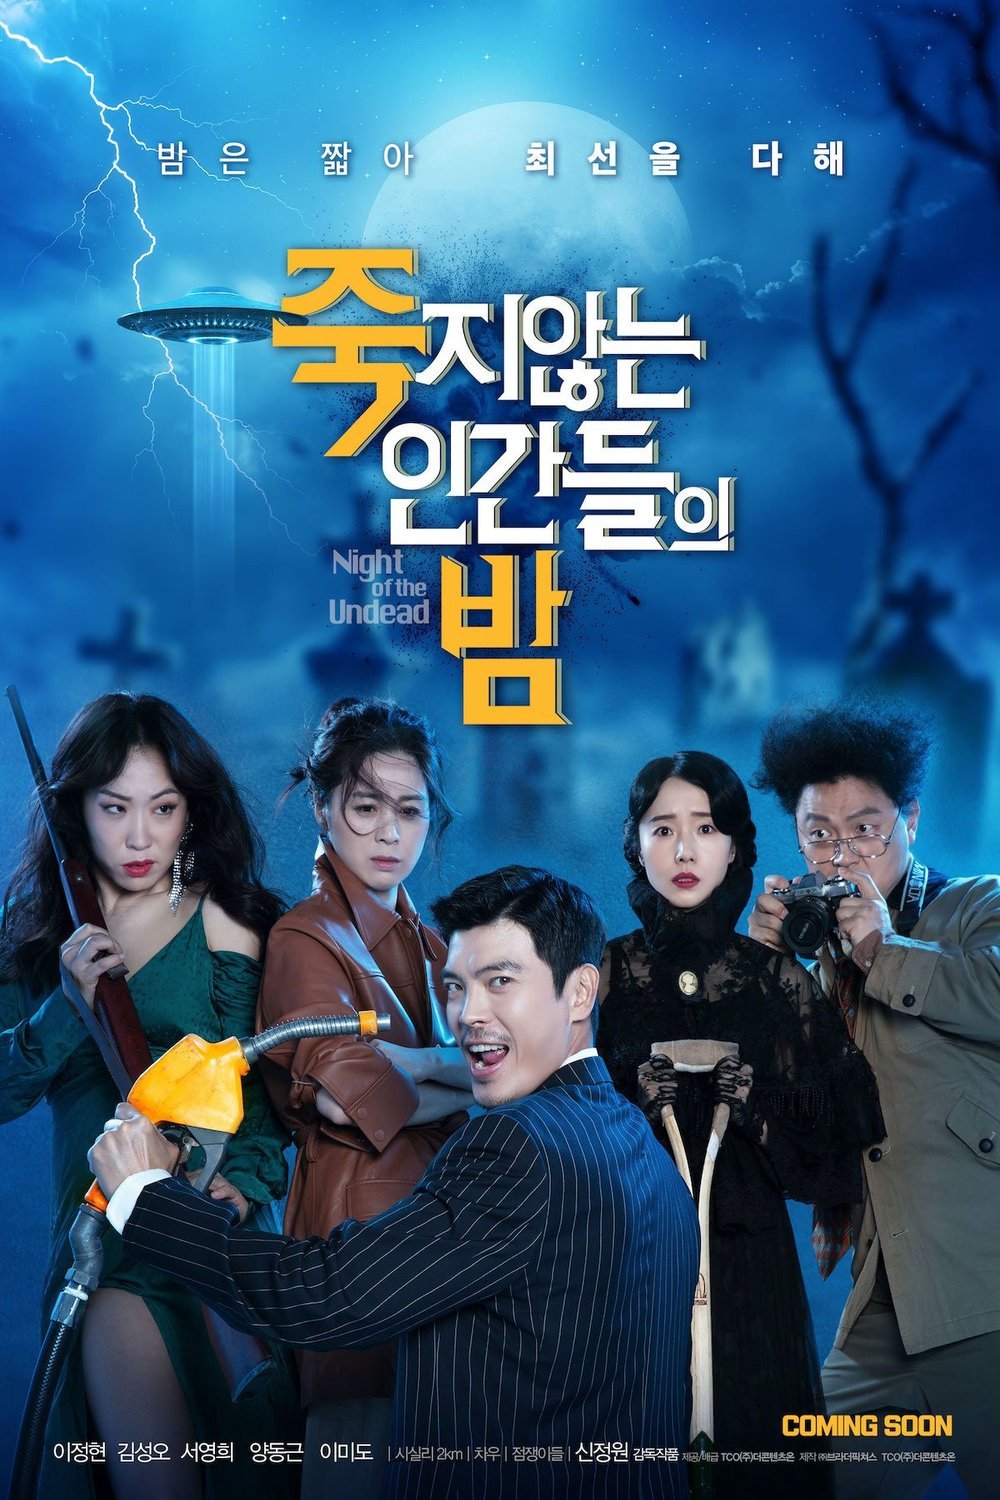 Korean poster of the movie Night of the Undead